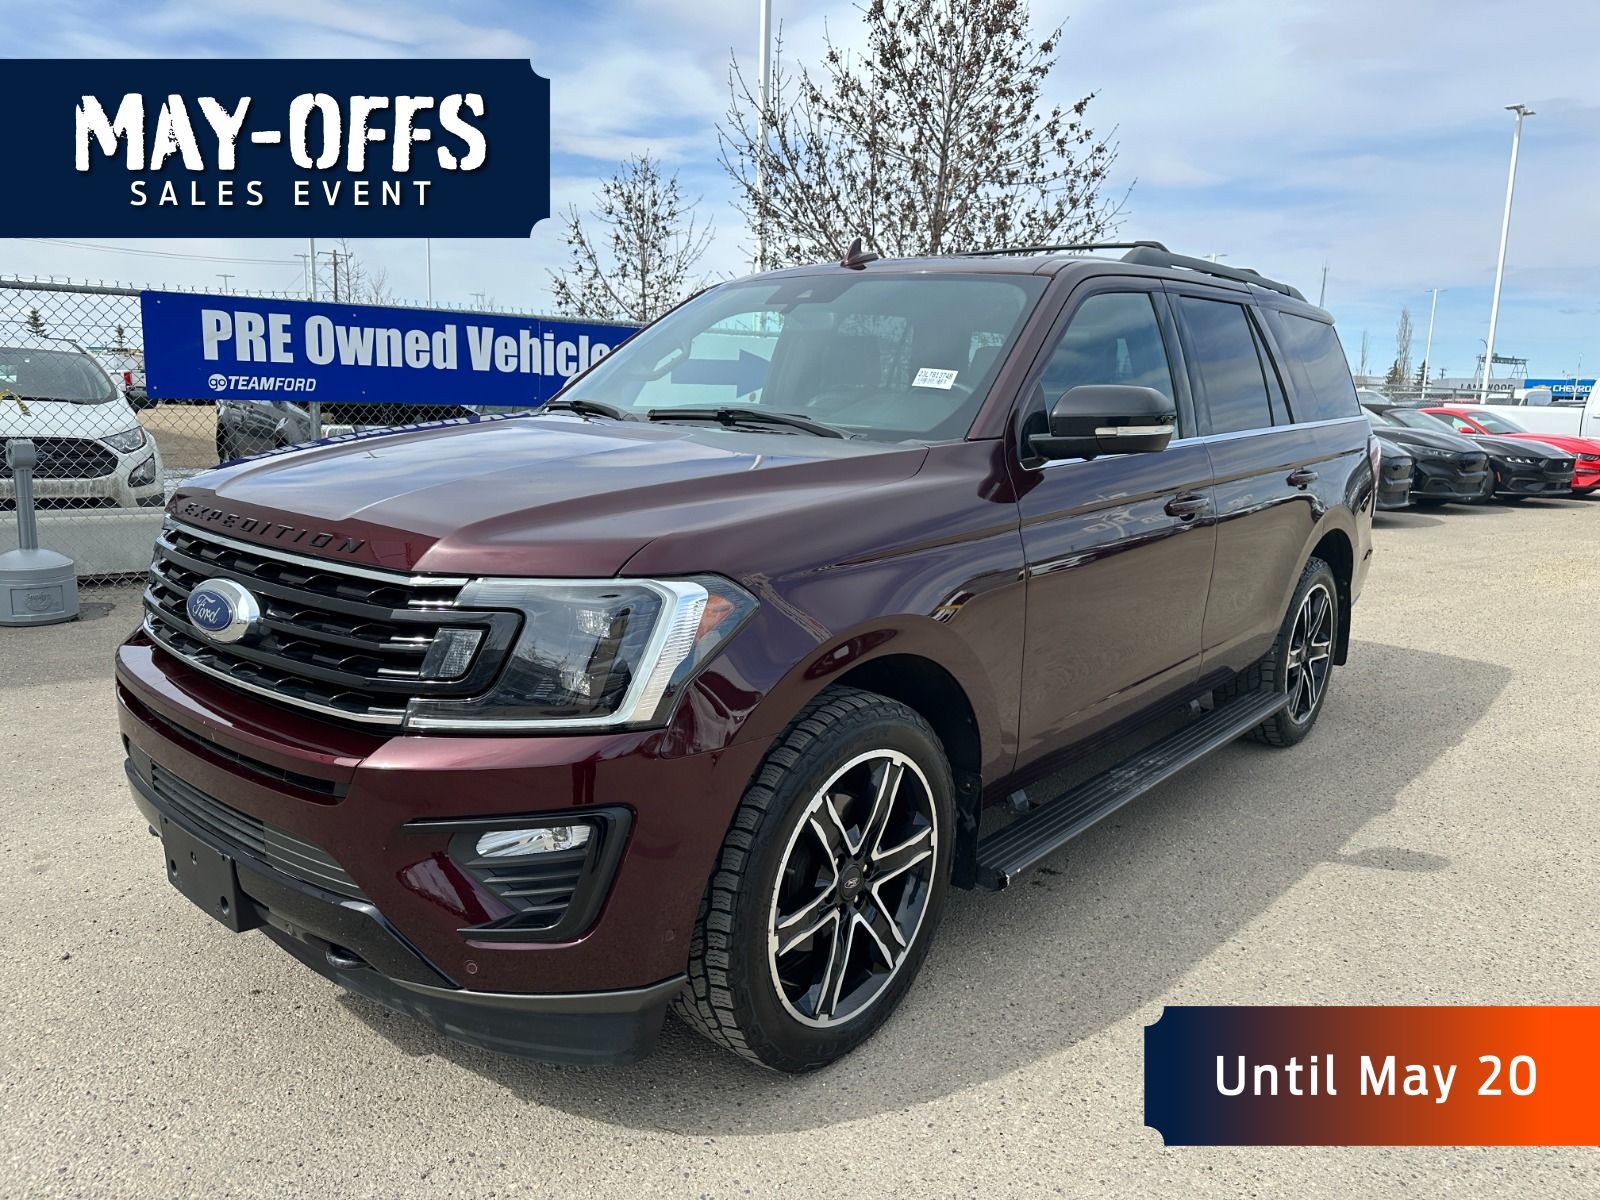 2020 Ford Expedition 3.5L ECOBOOST V6 ENG, LIMITED, CONVENIENCE PKG, FO